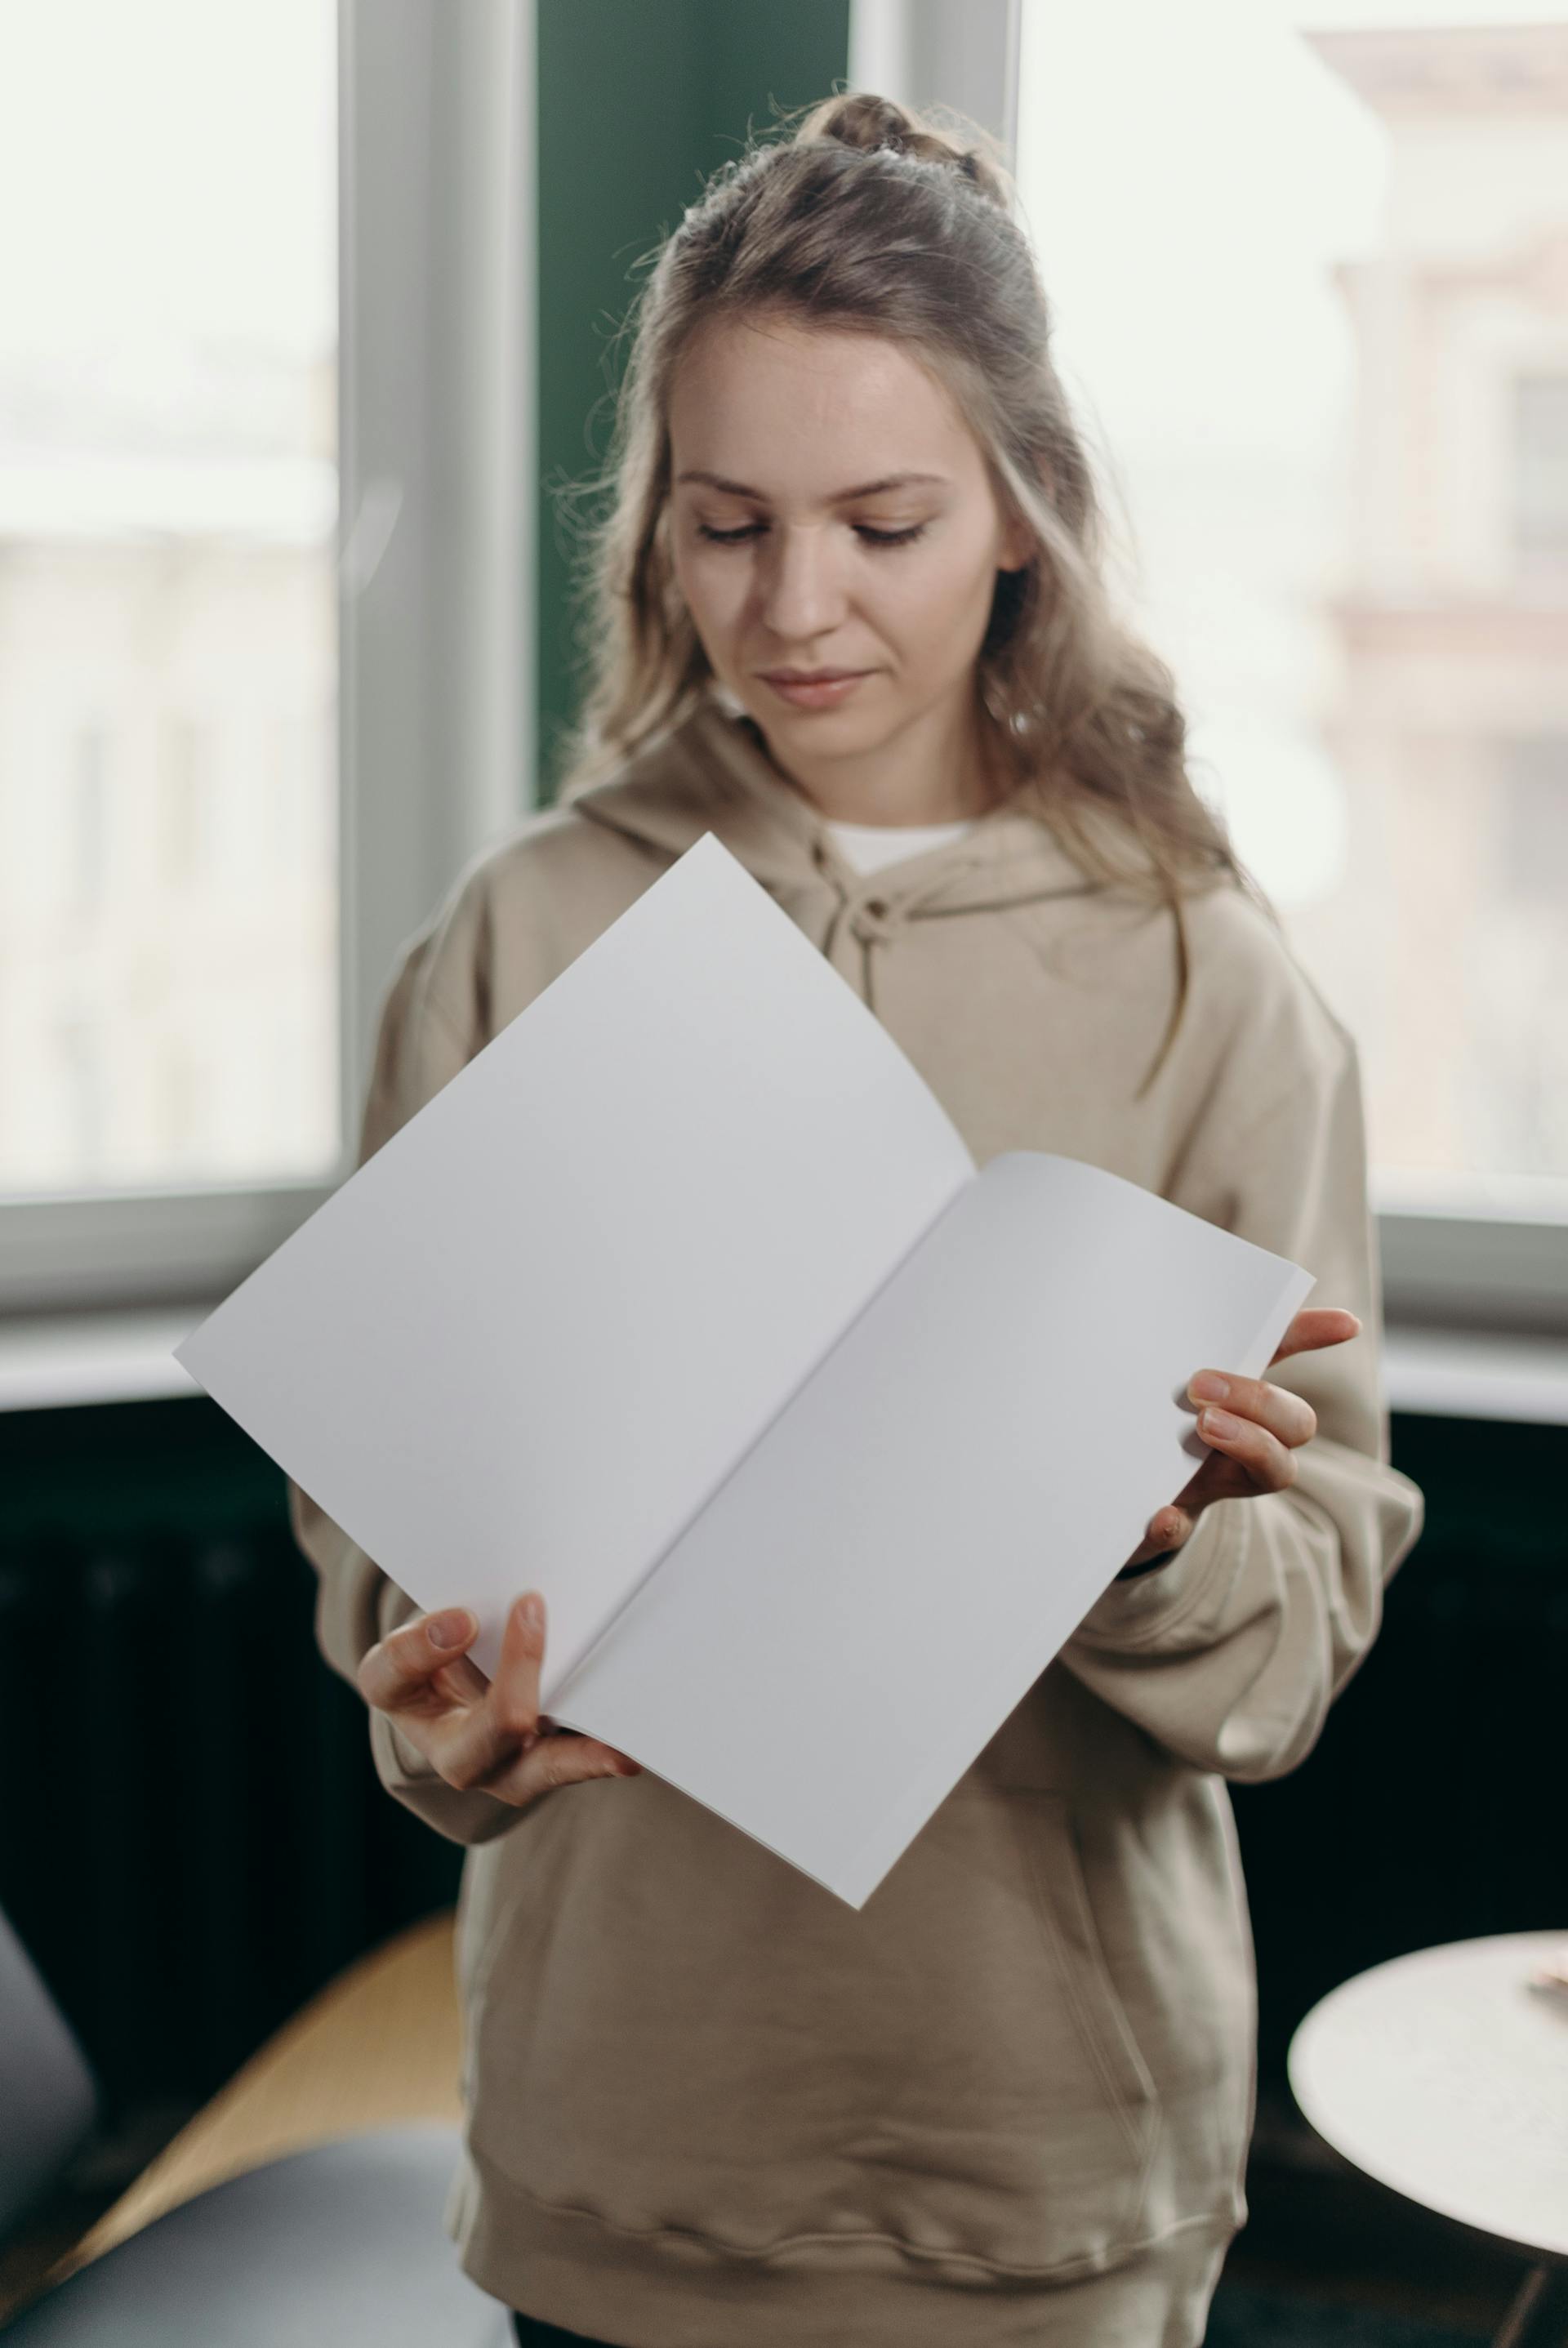 A woman looking at a white paper in her hands | Source: Pexels